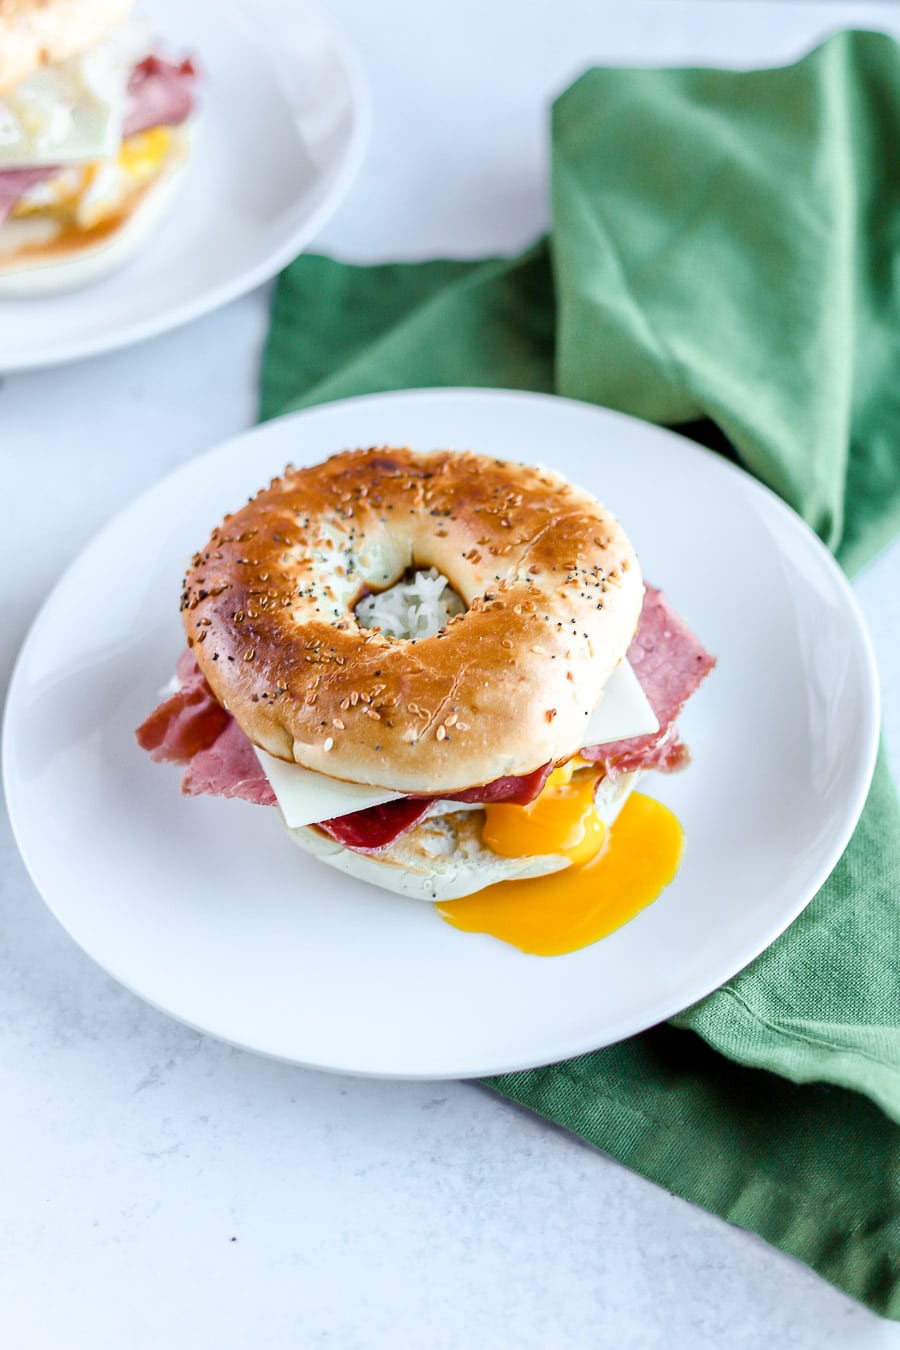 St. Patrick's Day isn't complete without a little hangover breakfast sandwich. So, why not make it festive with this Reuben Breakfast Sandwich?